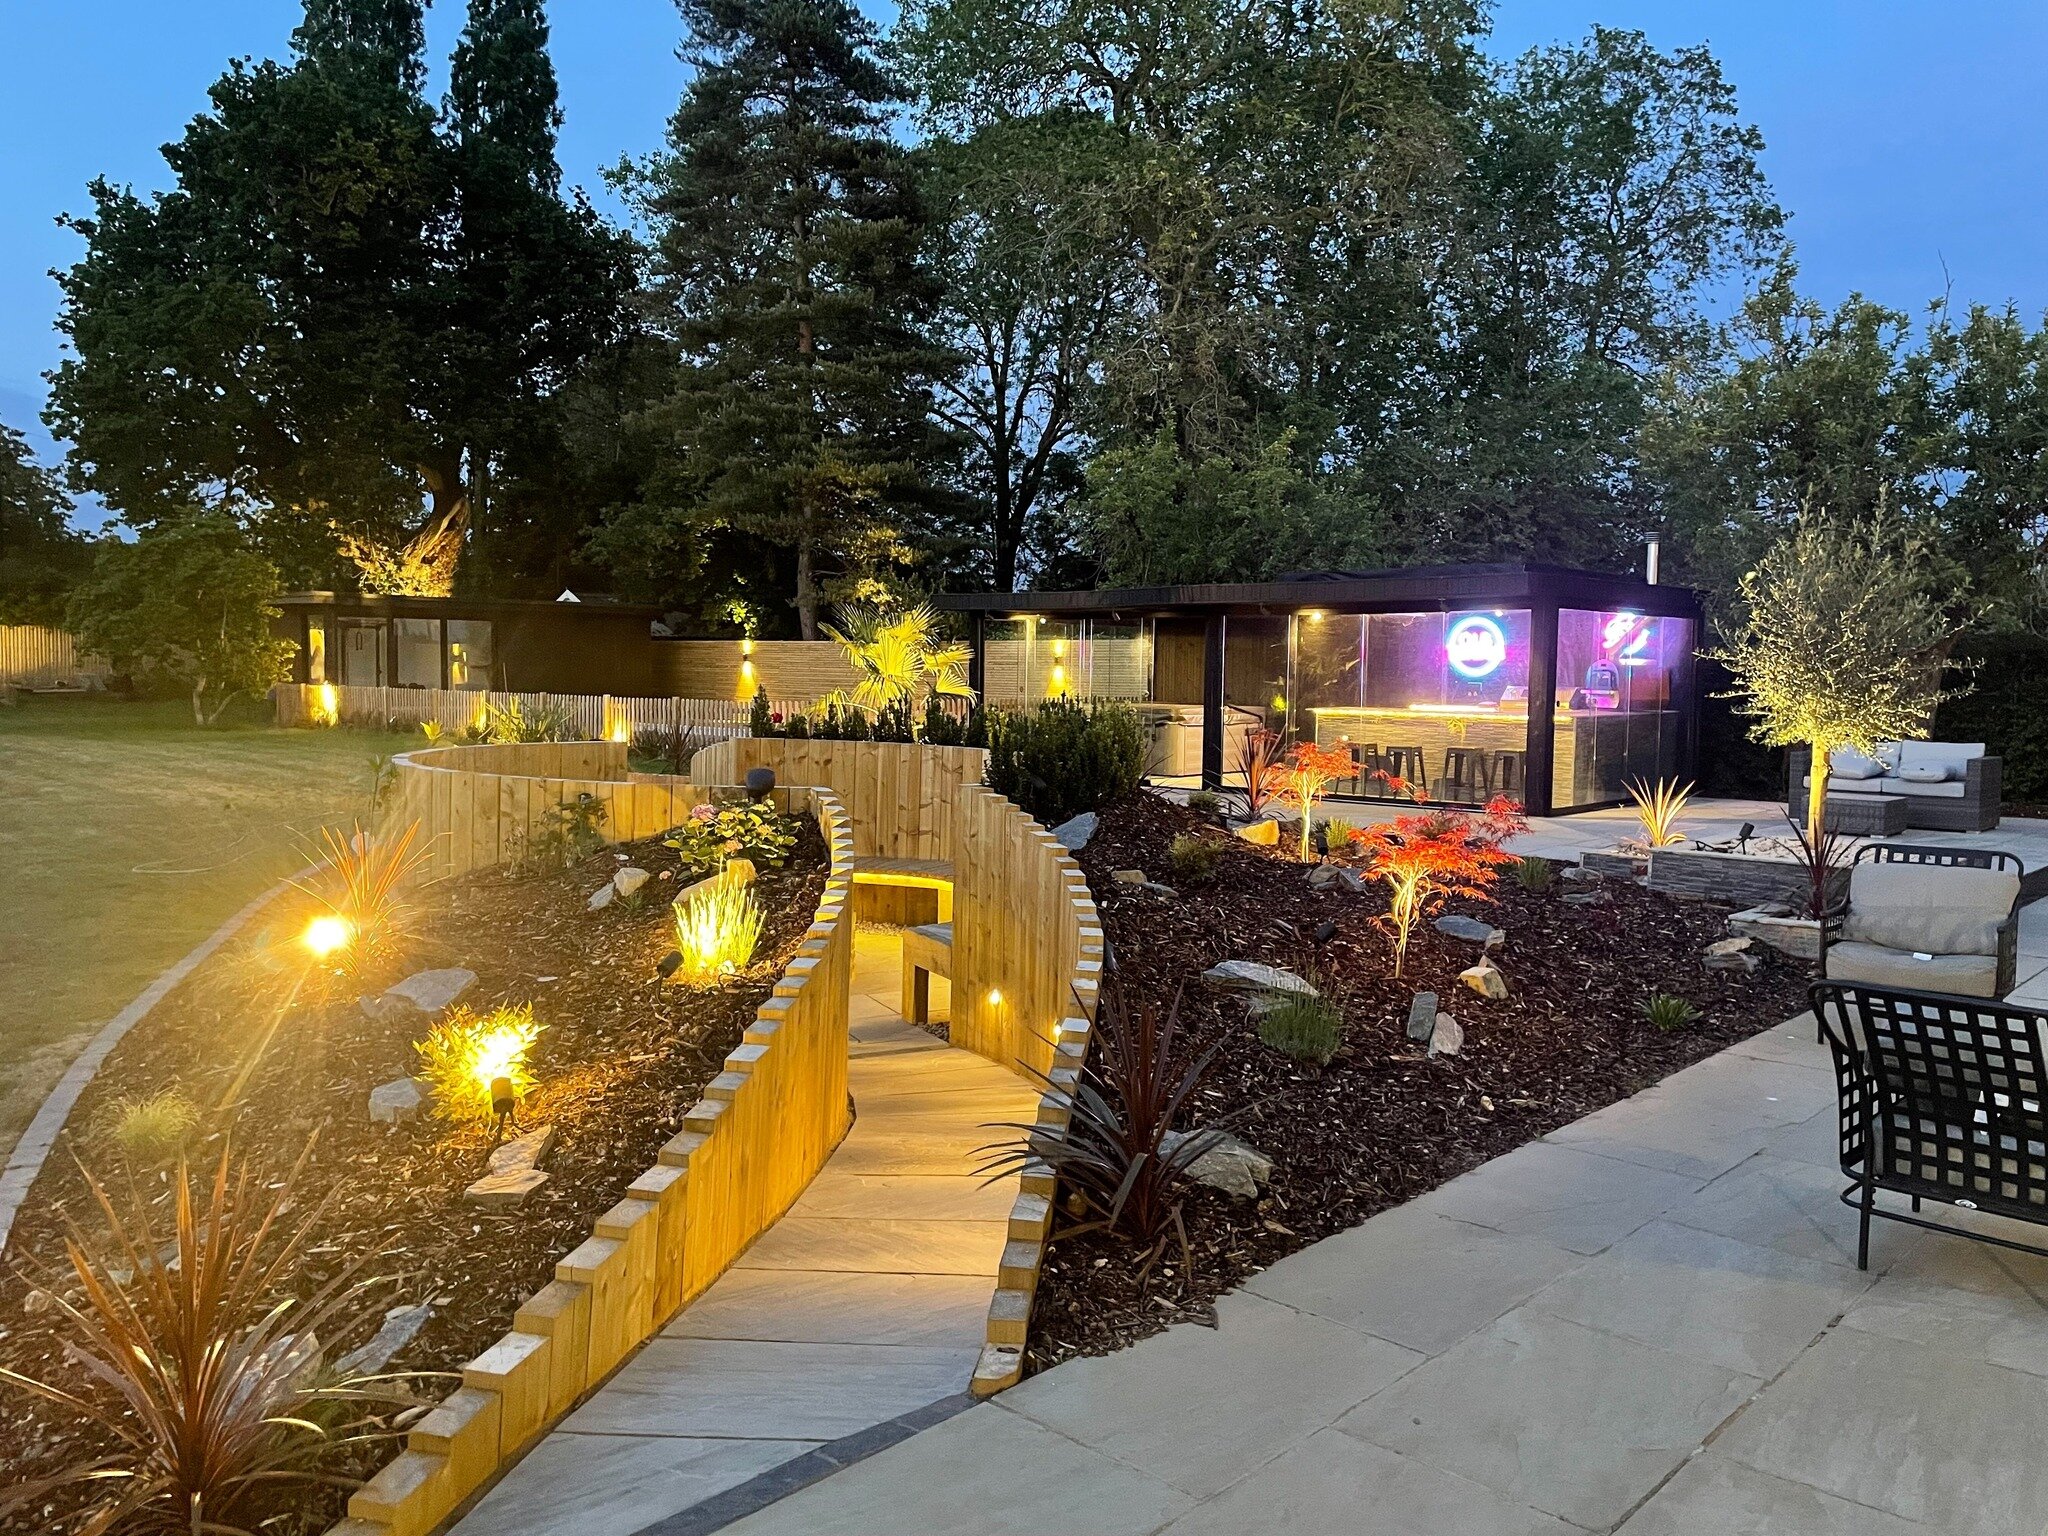 Beautiful party garden completed in Maidenhead

#electrician #electriciansuk #handtools #cktools #weratoolsuk #megger #sparkylife #electriciansknow #onthetools #dewaltcordless #tradesman #sparkysofinstagram #protools #workhard